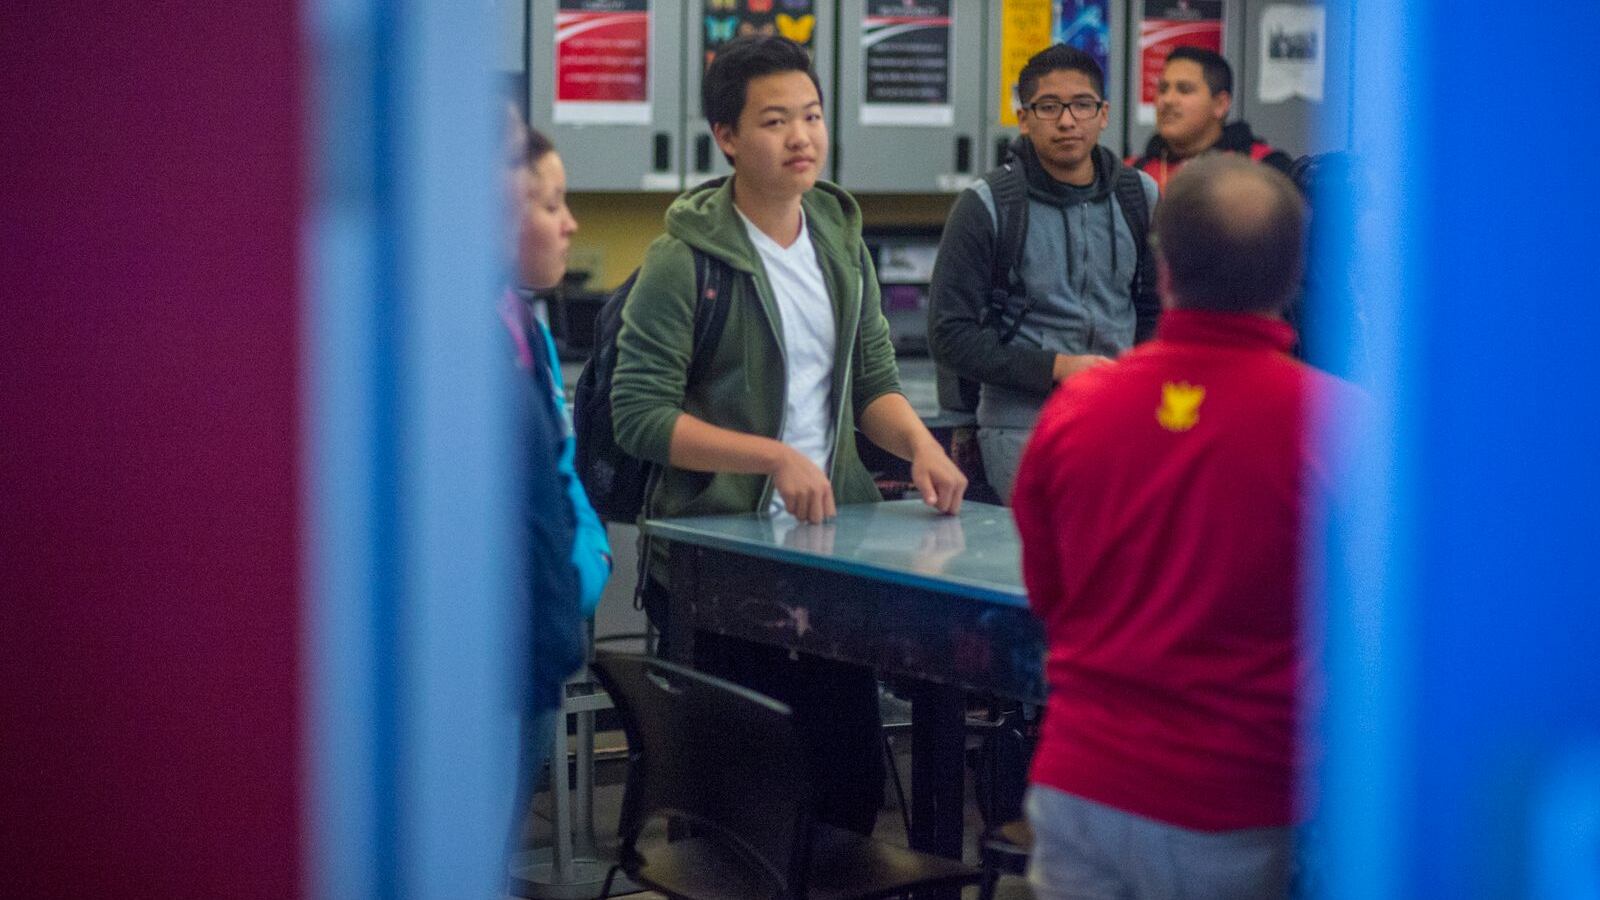 Four high school students stand around a table speaking with an older adult wearing a red jacket. They are seen through a blue doorframe.